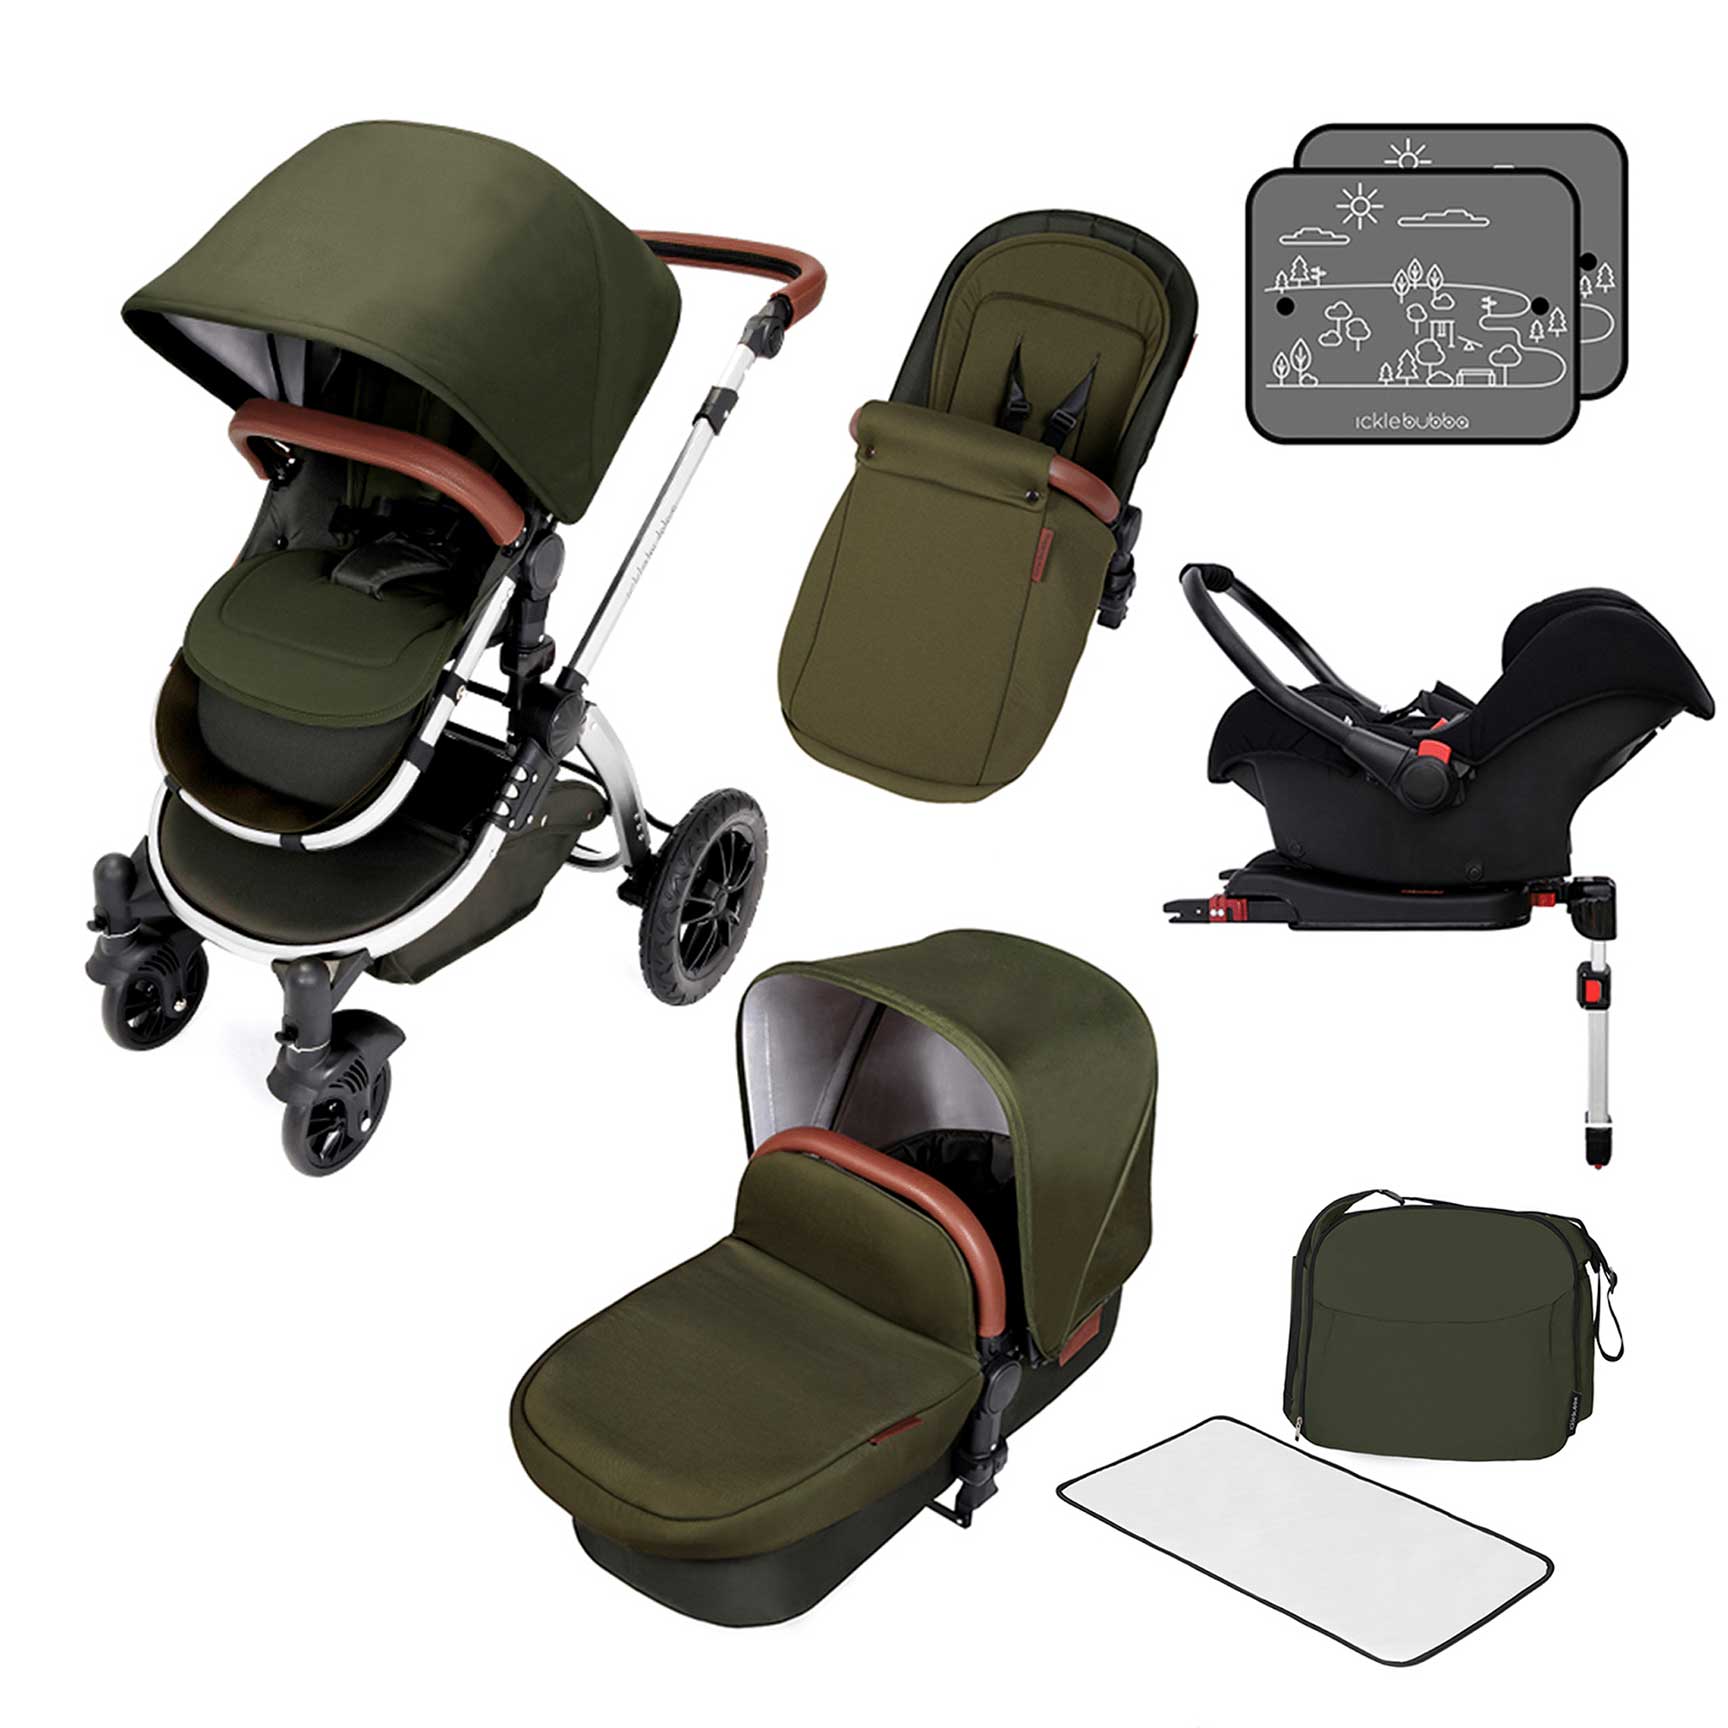 Ickle bubba Stomp Luxe All in One Premium i-Size Travel System